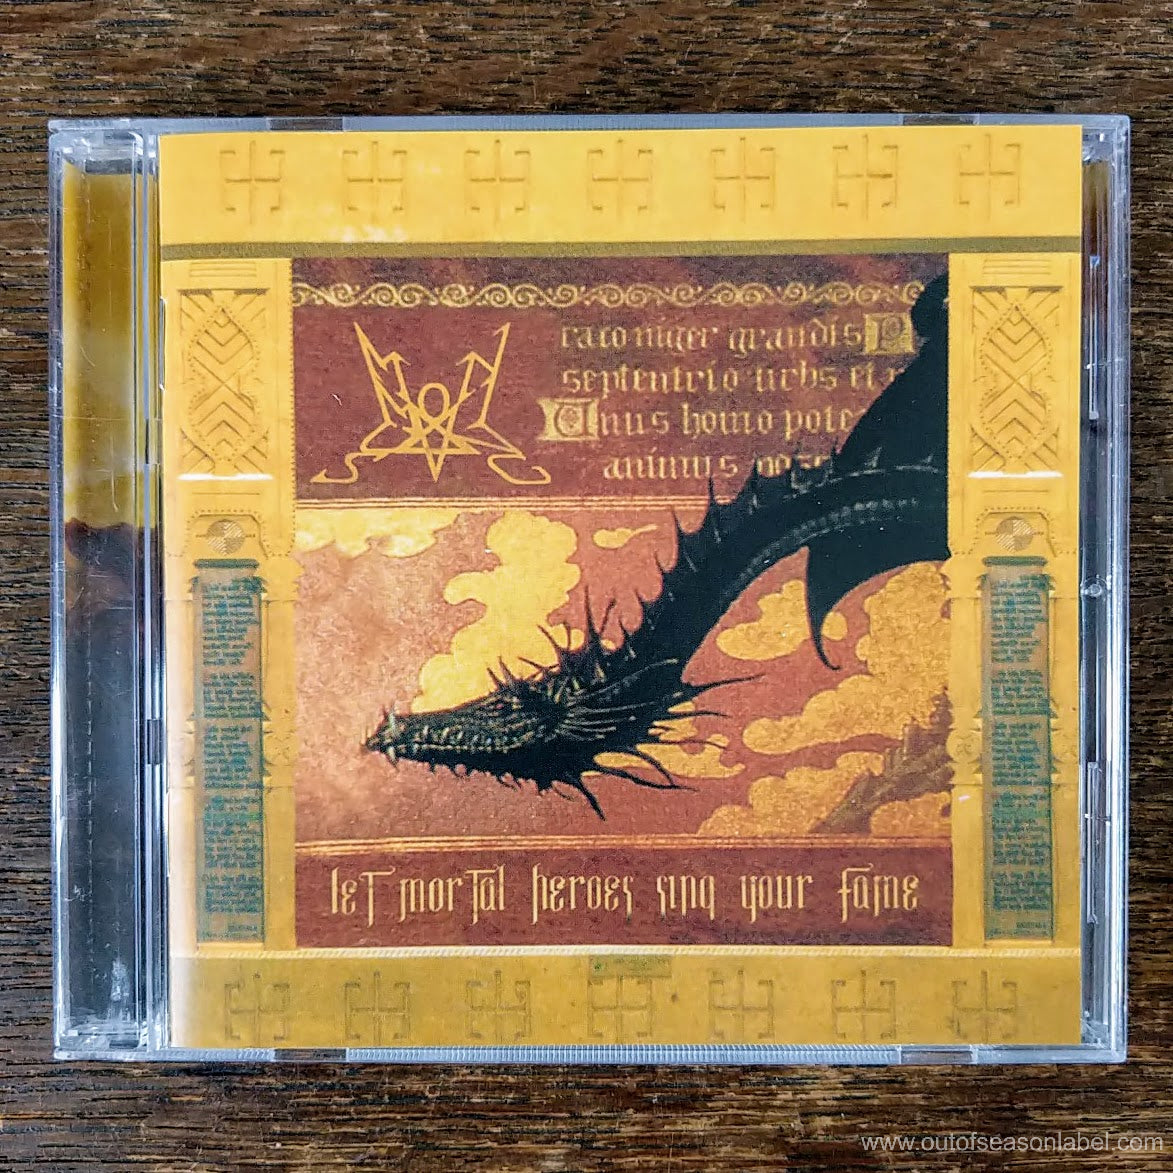 [SOLD OUT] SUMMONING "Let Mortal Heroes Sing Your Fame" CD